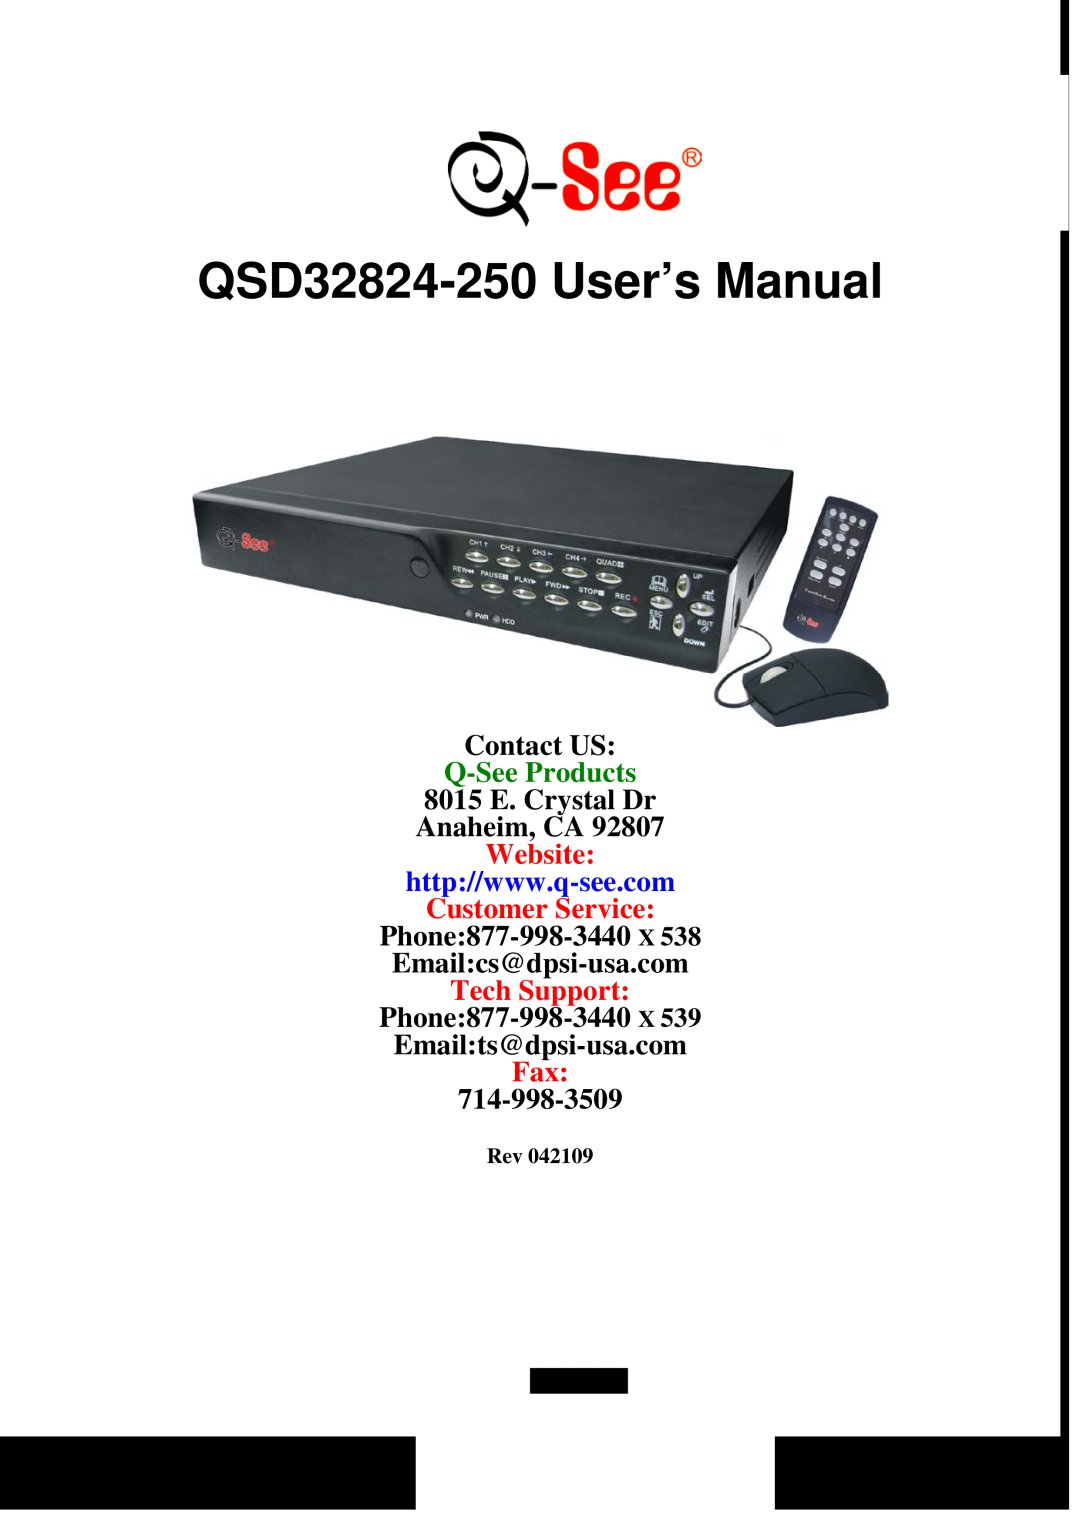 Q-See user manual QSD32824-250 User’s Manual, Contact US, Q-See Products, 8015 E. Crystal Dr Anaheim, CA, Website 